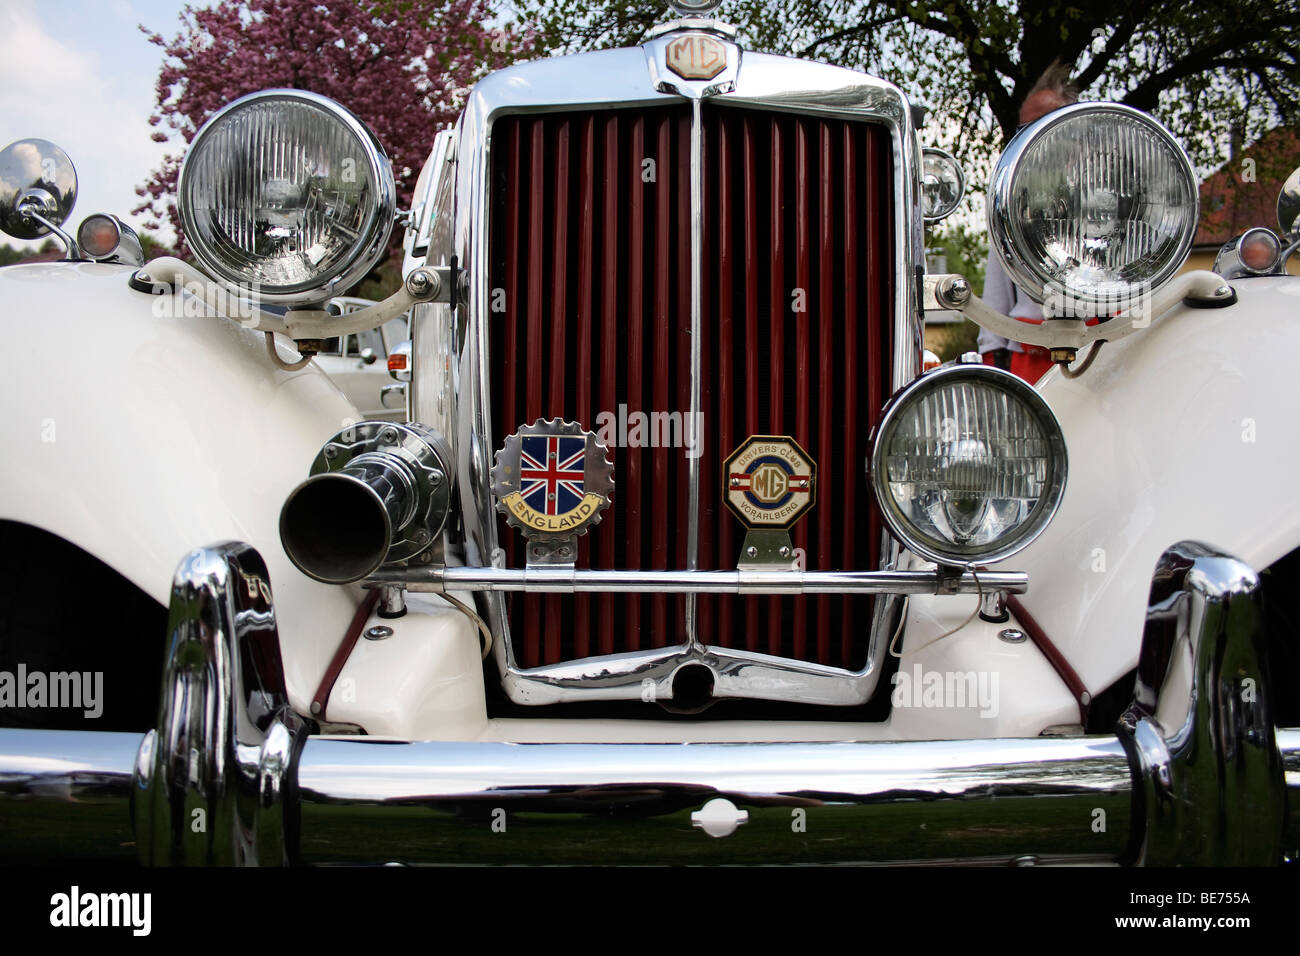 View of the front of an MG, vintage car Stock Photo